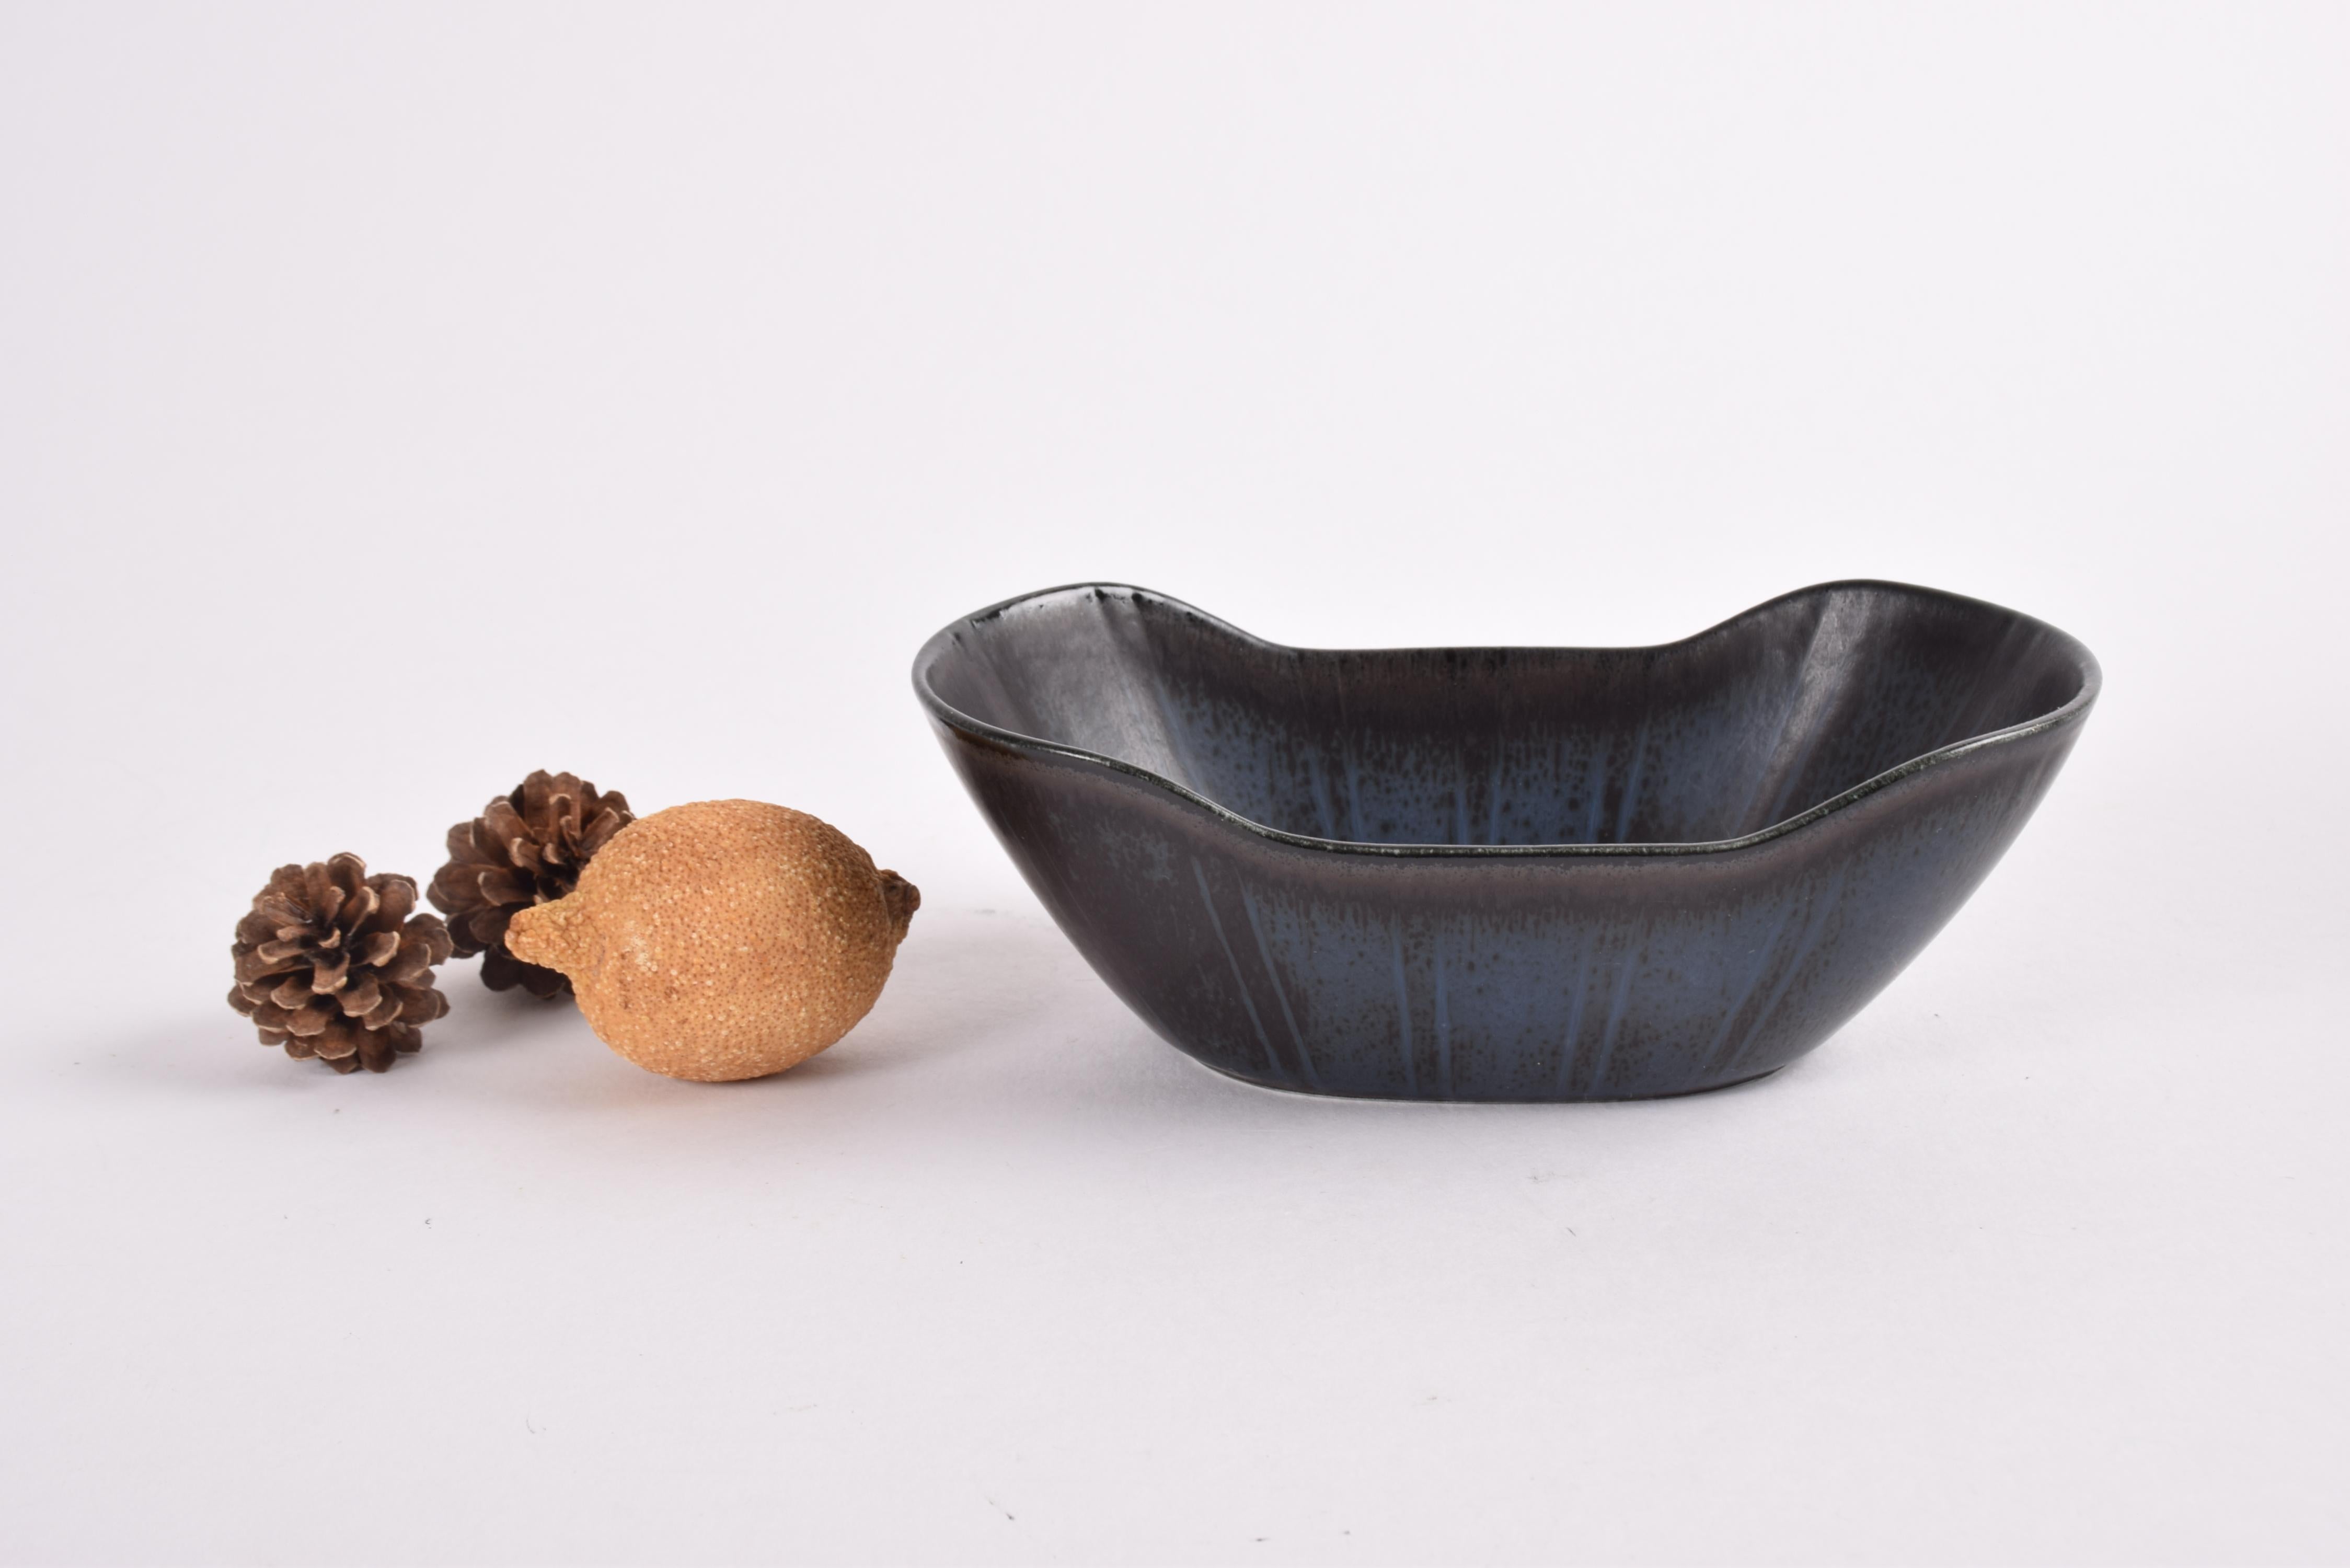 Small oblong ceramic bowl by Gunnar Nylund for Rörstrand Sweden.
Made ca 1950s to 1960s.

The bowl features a glaze with a mix of dark colors: black, brown and blue gray, It is decorated with a stripe decor on the walls and circles on the inside